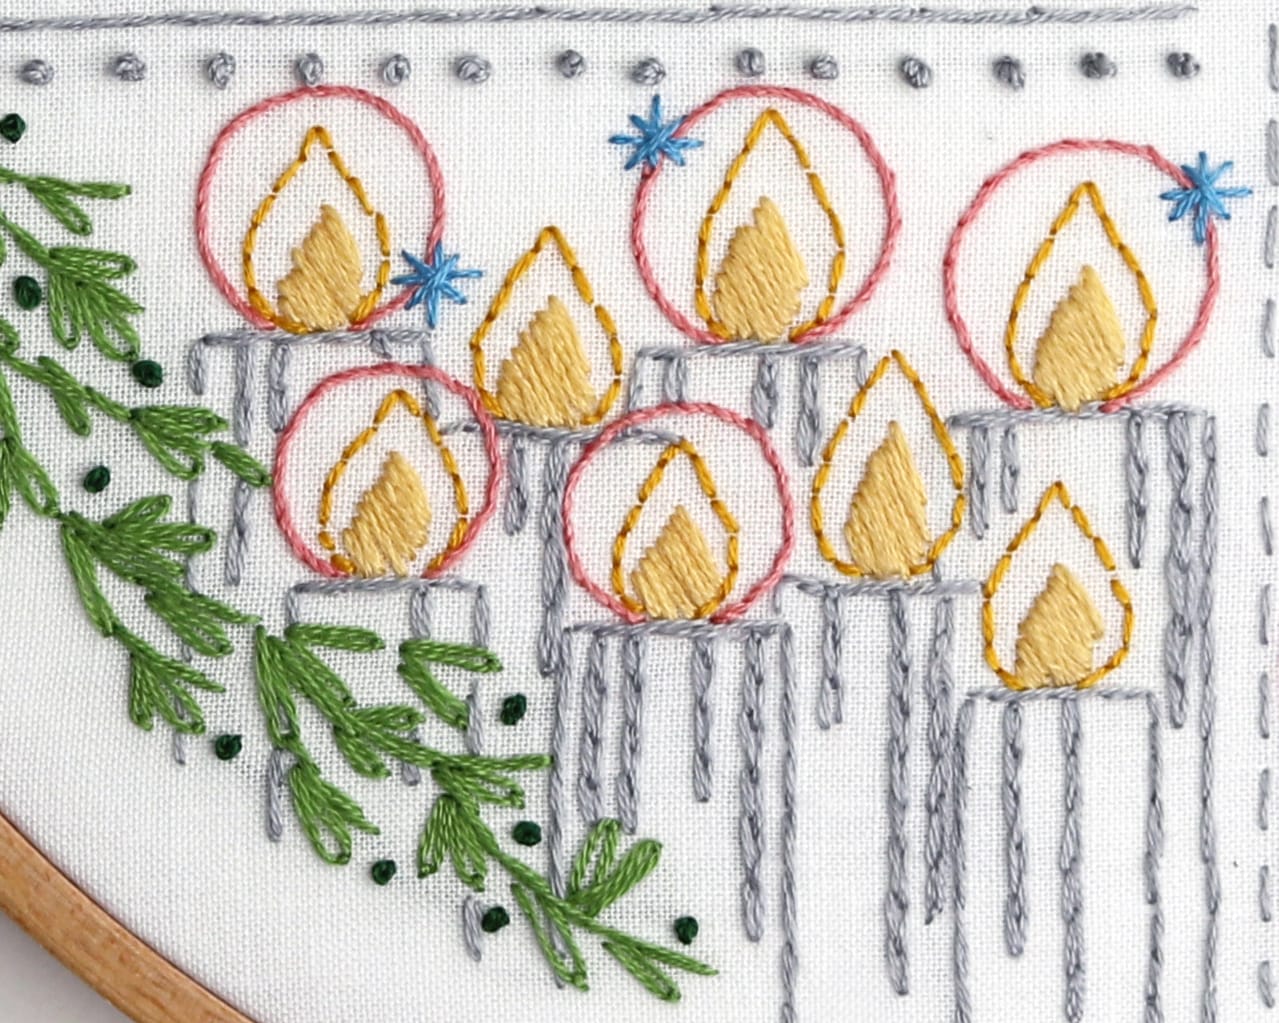 embroidery details with haloed christmas candles